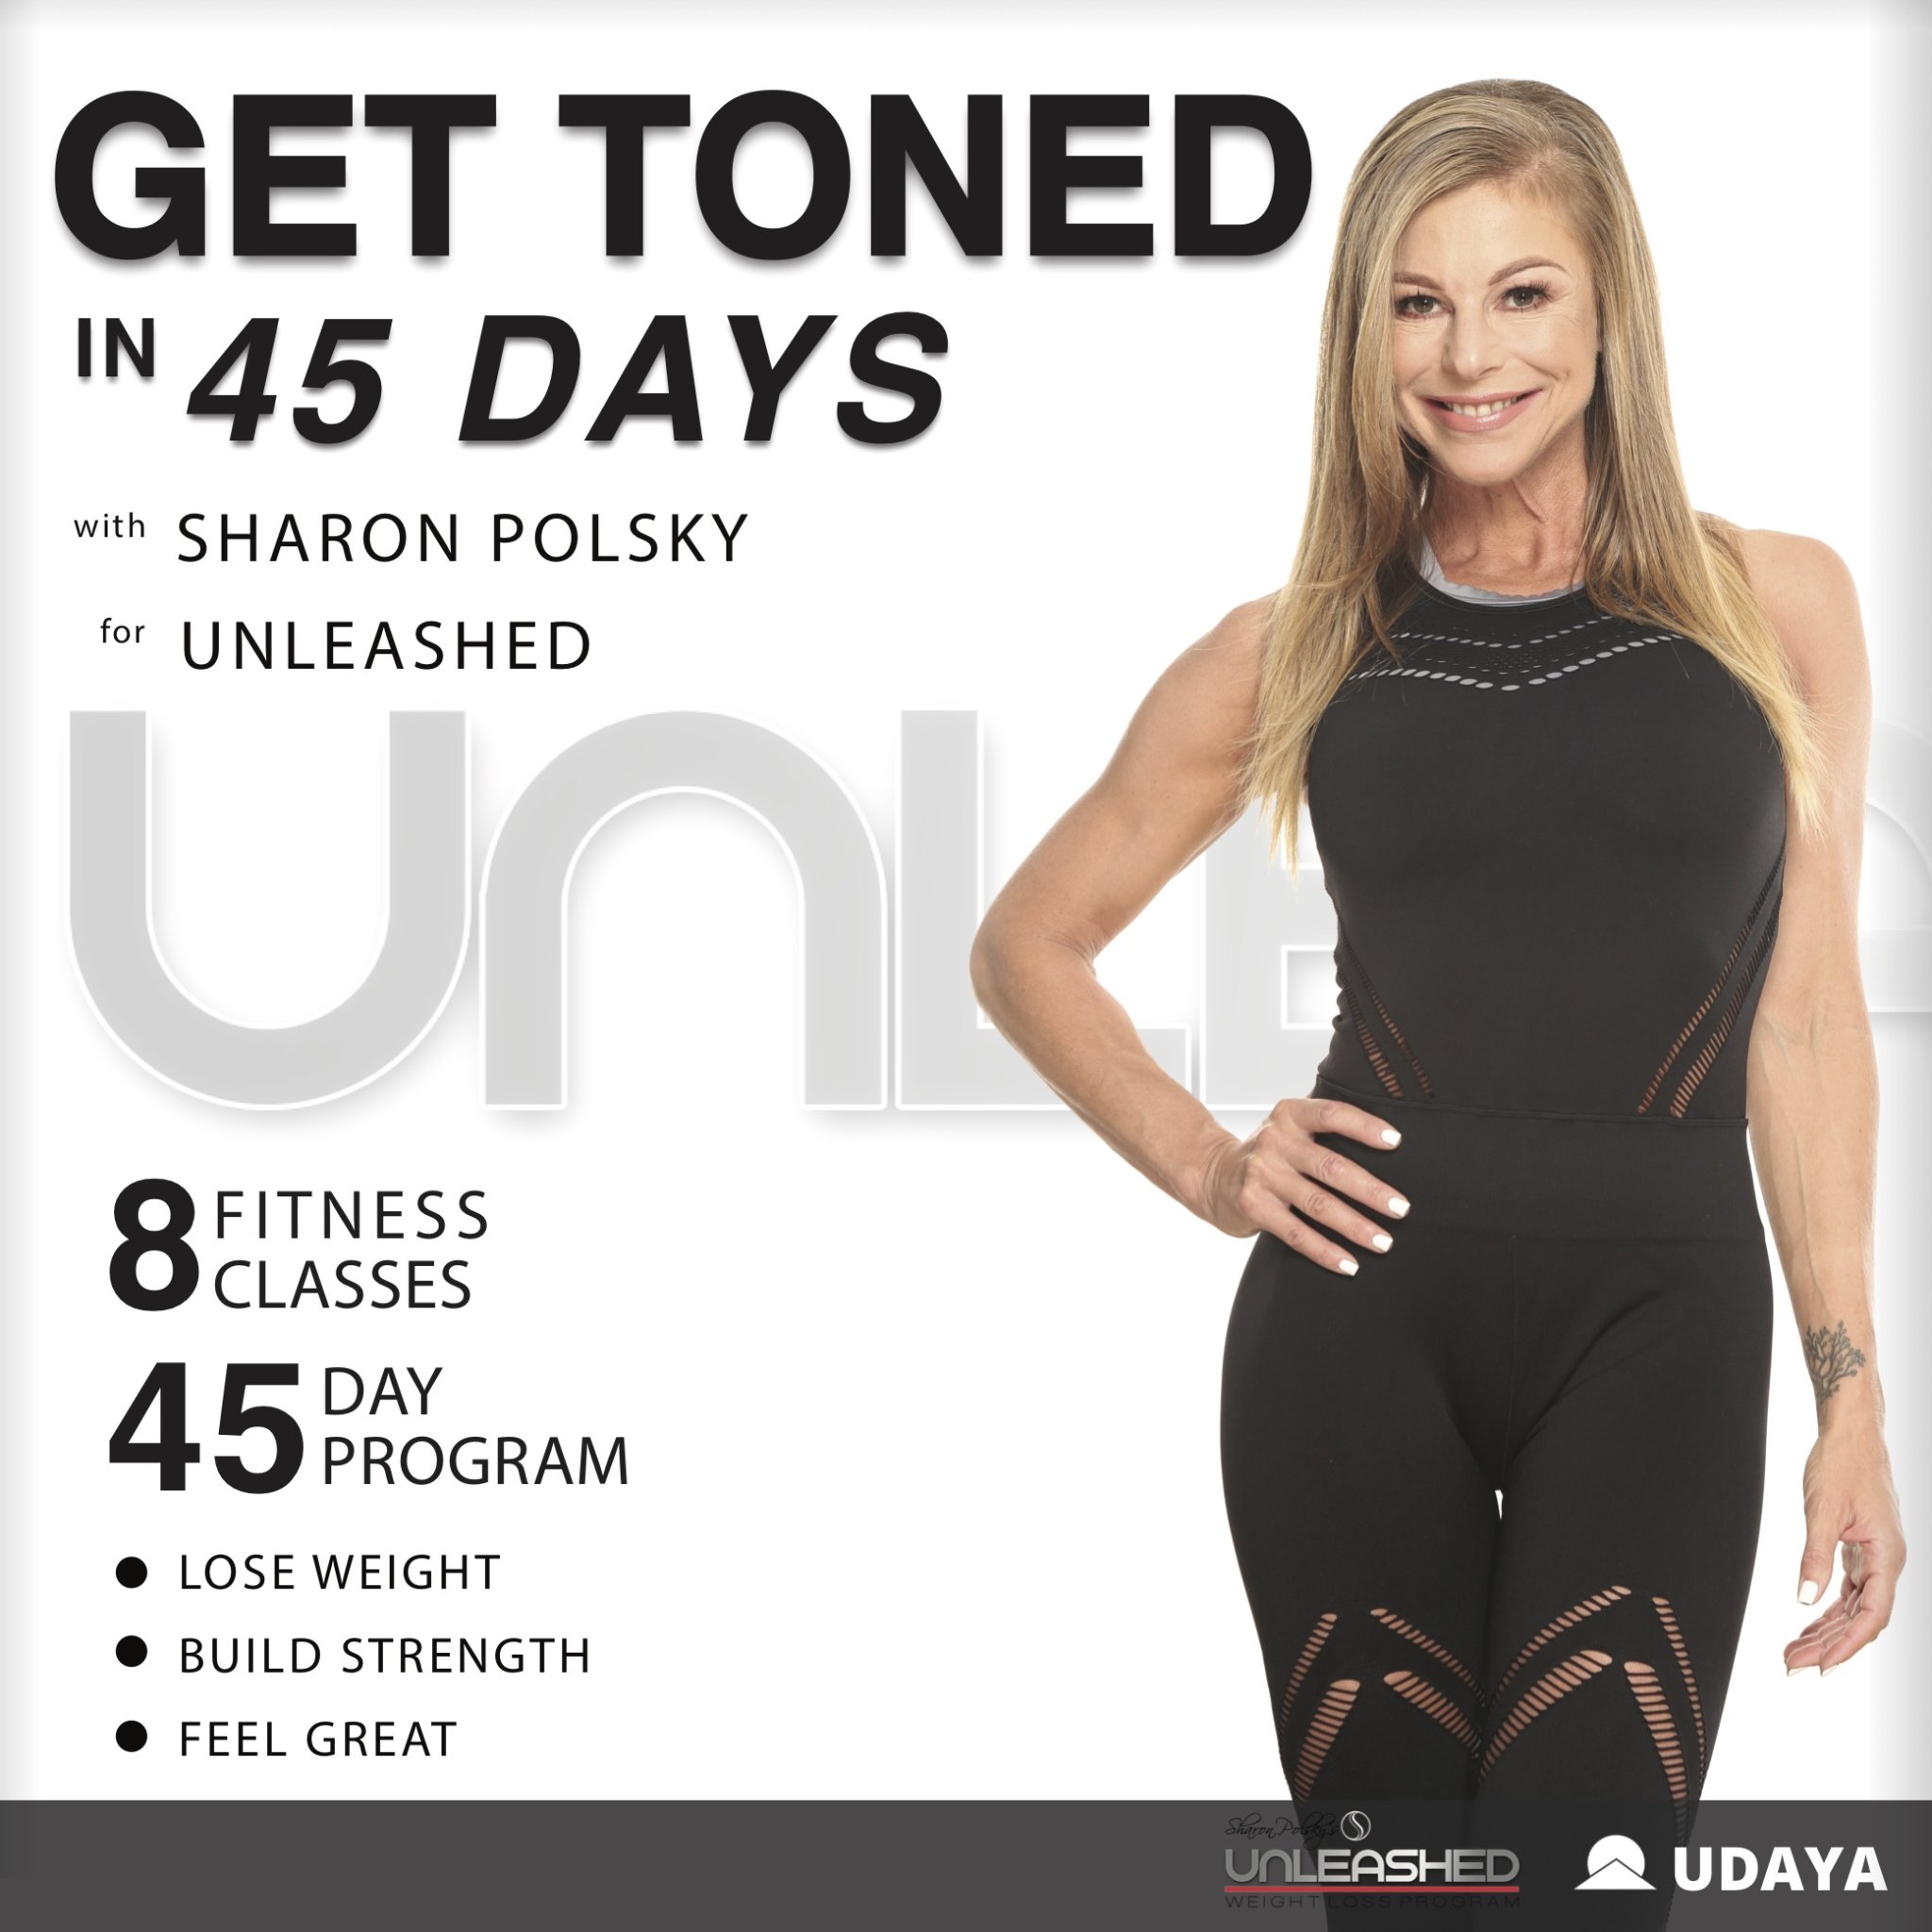 Sharon Polsky, Get Toned in 45 Days